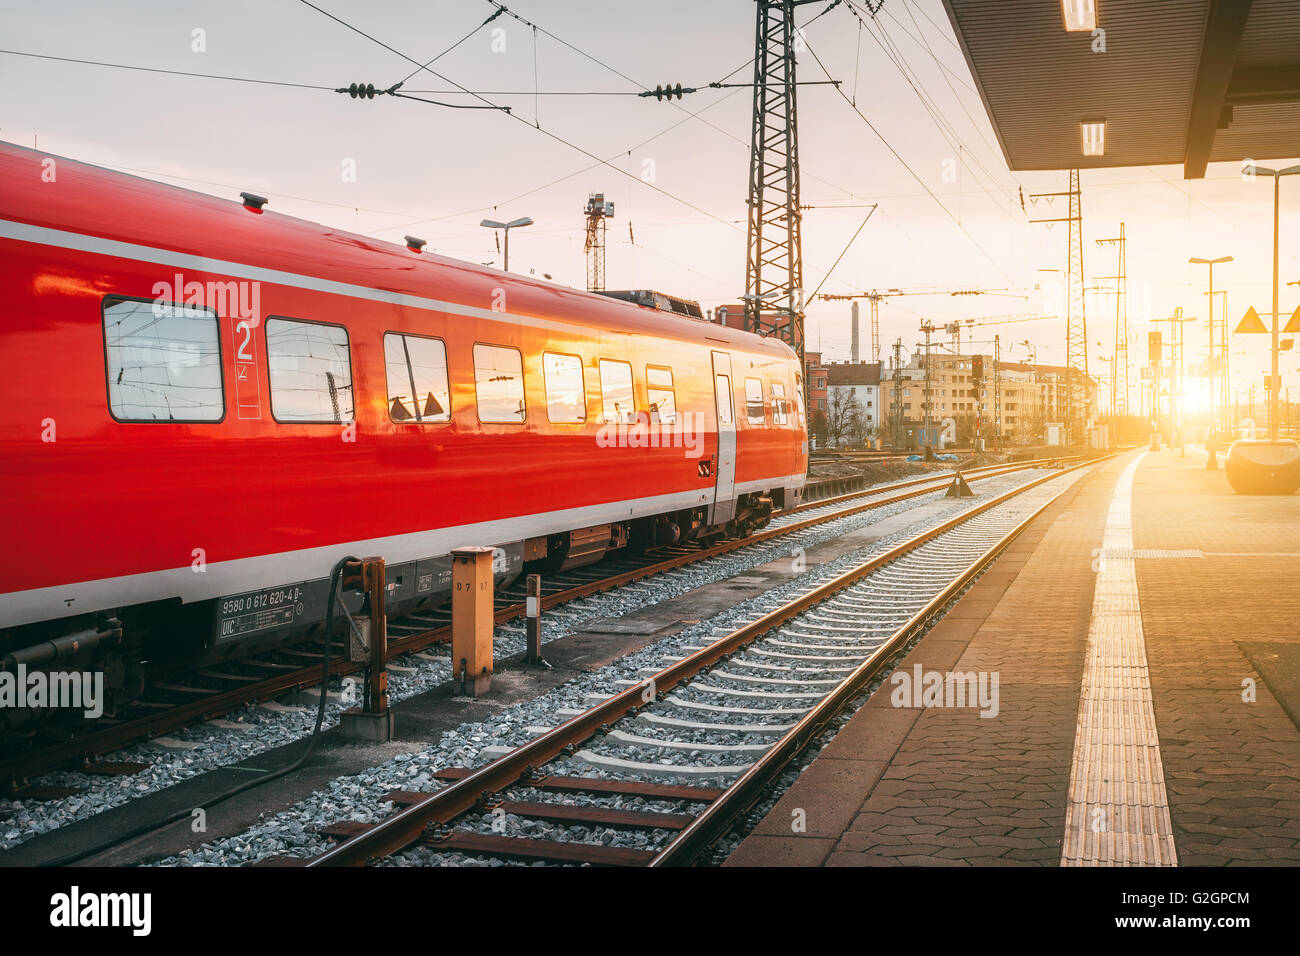 Beautiful railway station with modern red commuter train at colorful sunset in Nuremberg, Germany. Railroad with vintage toning Stock Photo